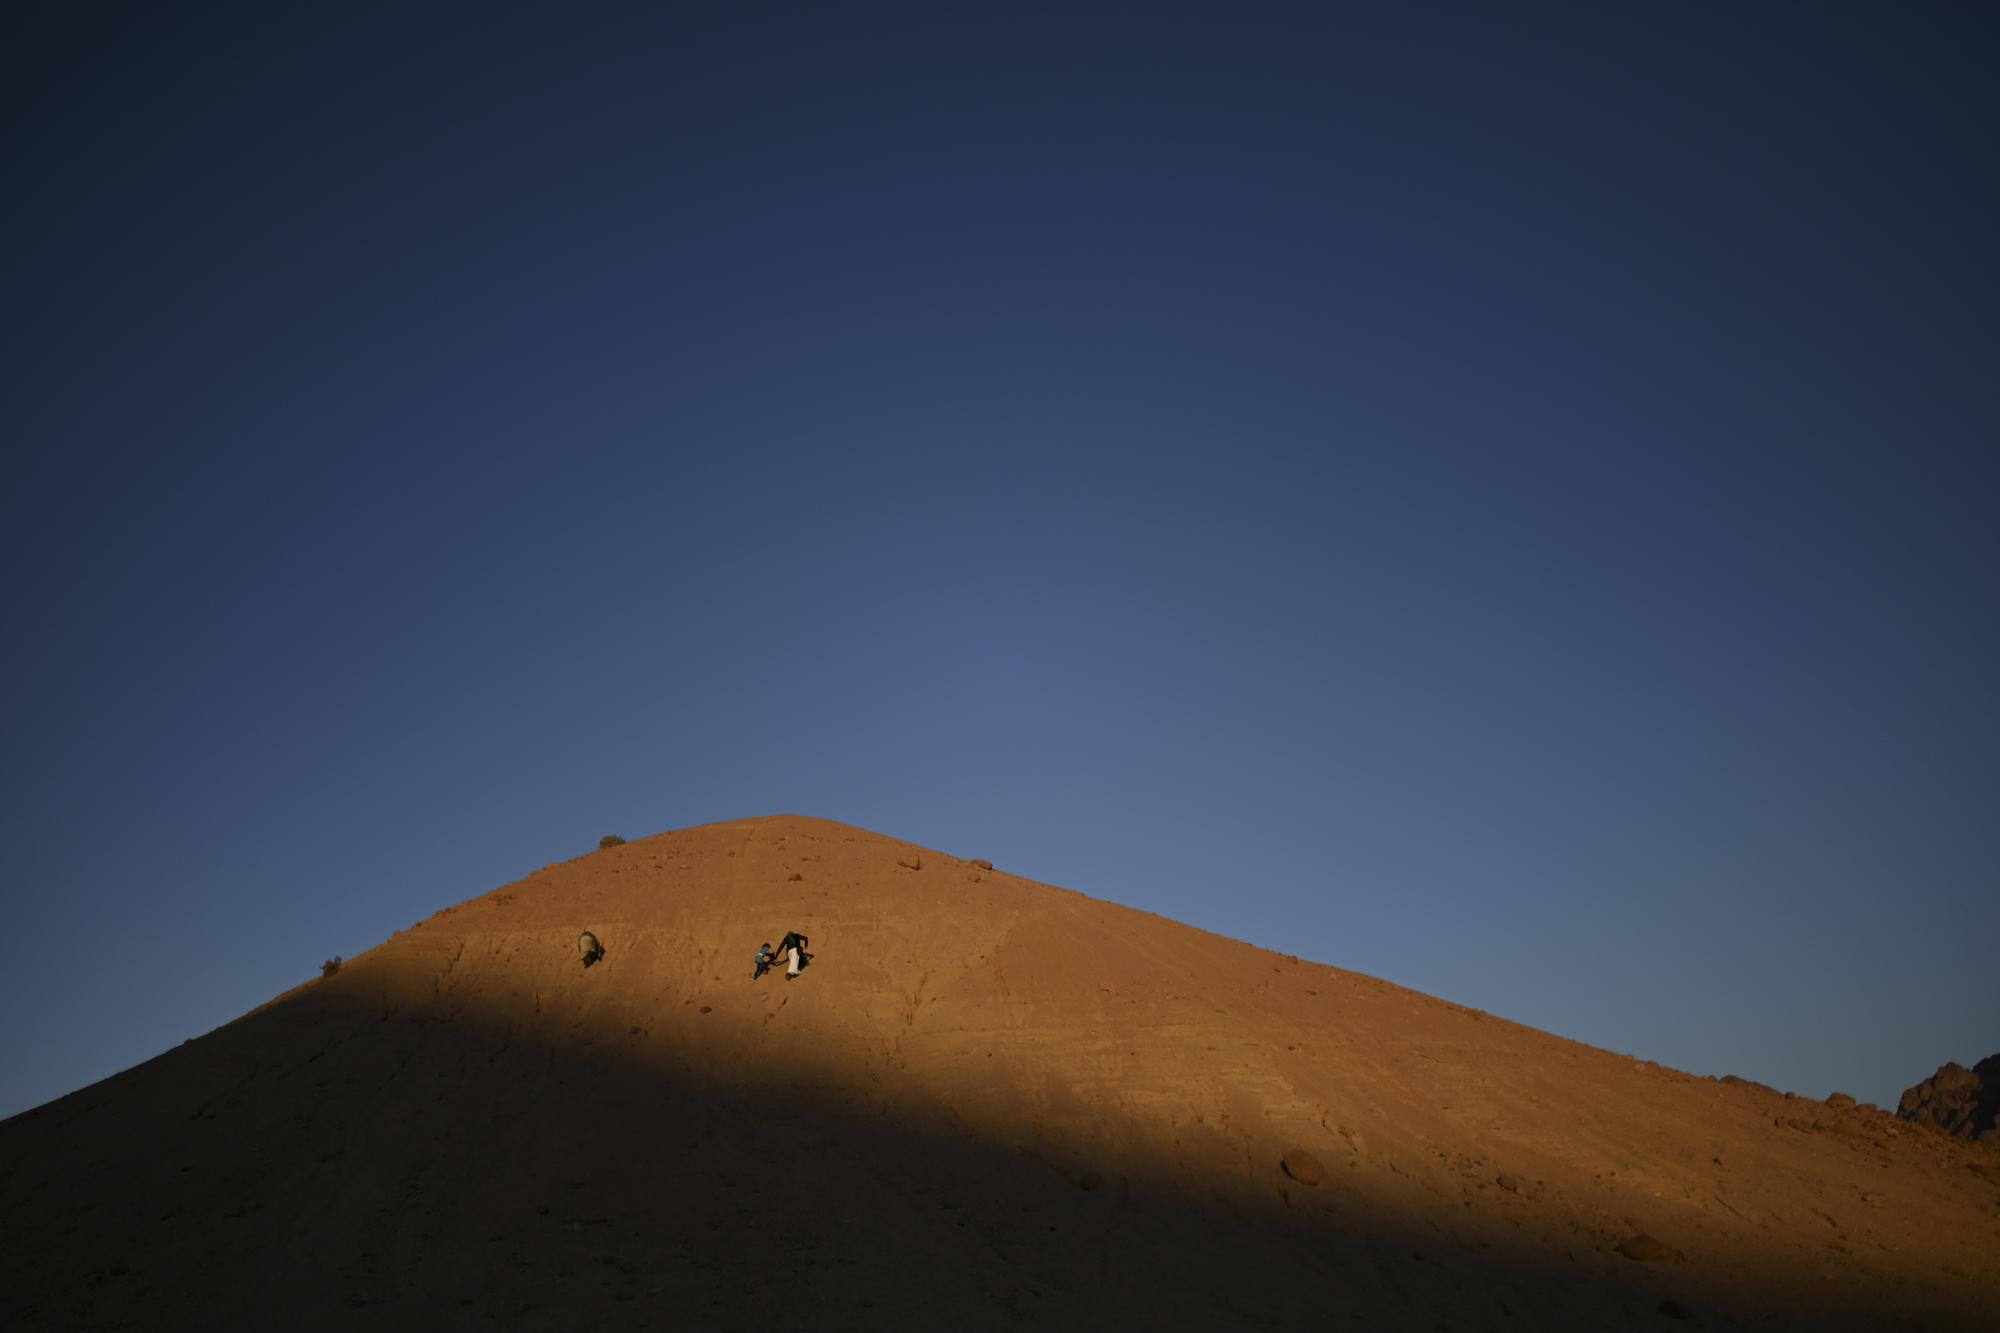 On National Geographic: In one of Egypt's most spiritual places, Bedouins find peace and resilience - A father and son walk over the hill to watch the last moments of sunset. Fathers within the...